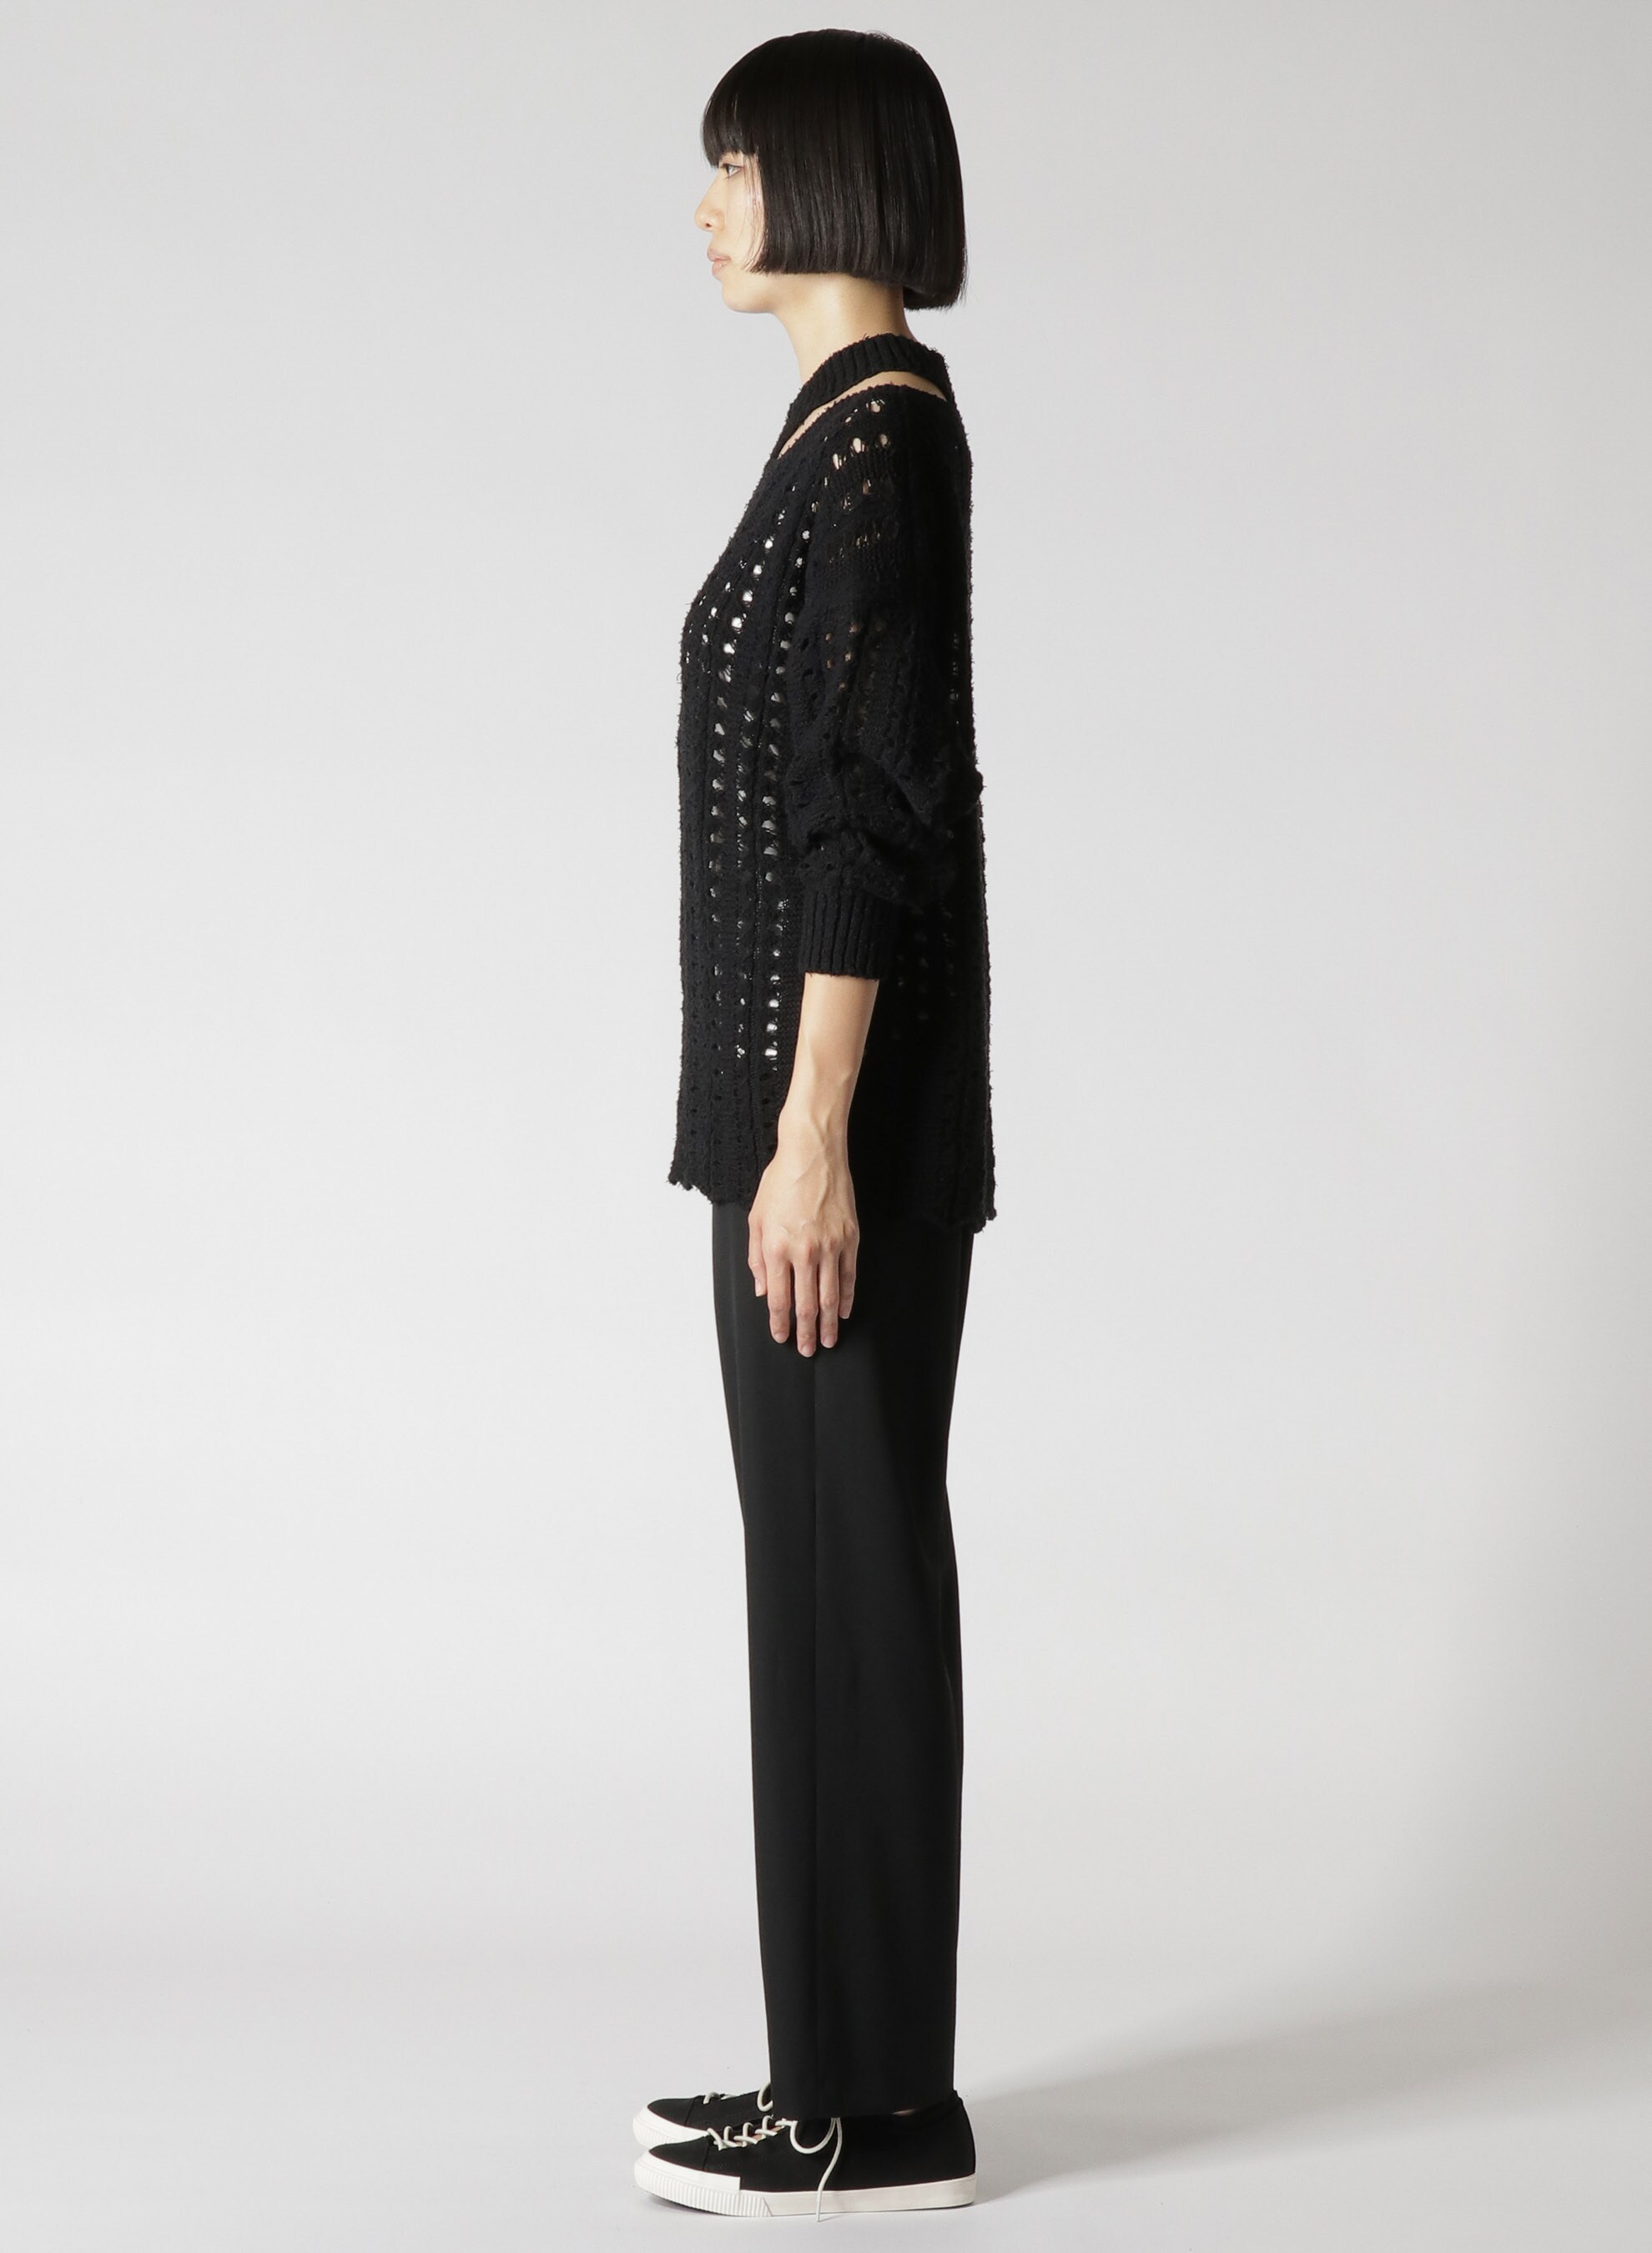 SWEATER WITH HOLES AND SLIT IN NECK(S Black): Yohji Yamamoto｜THE 